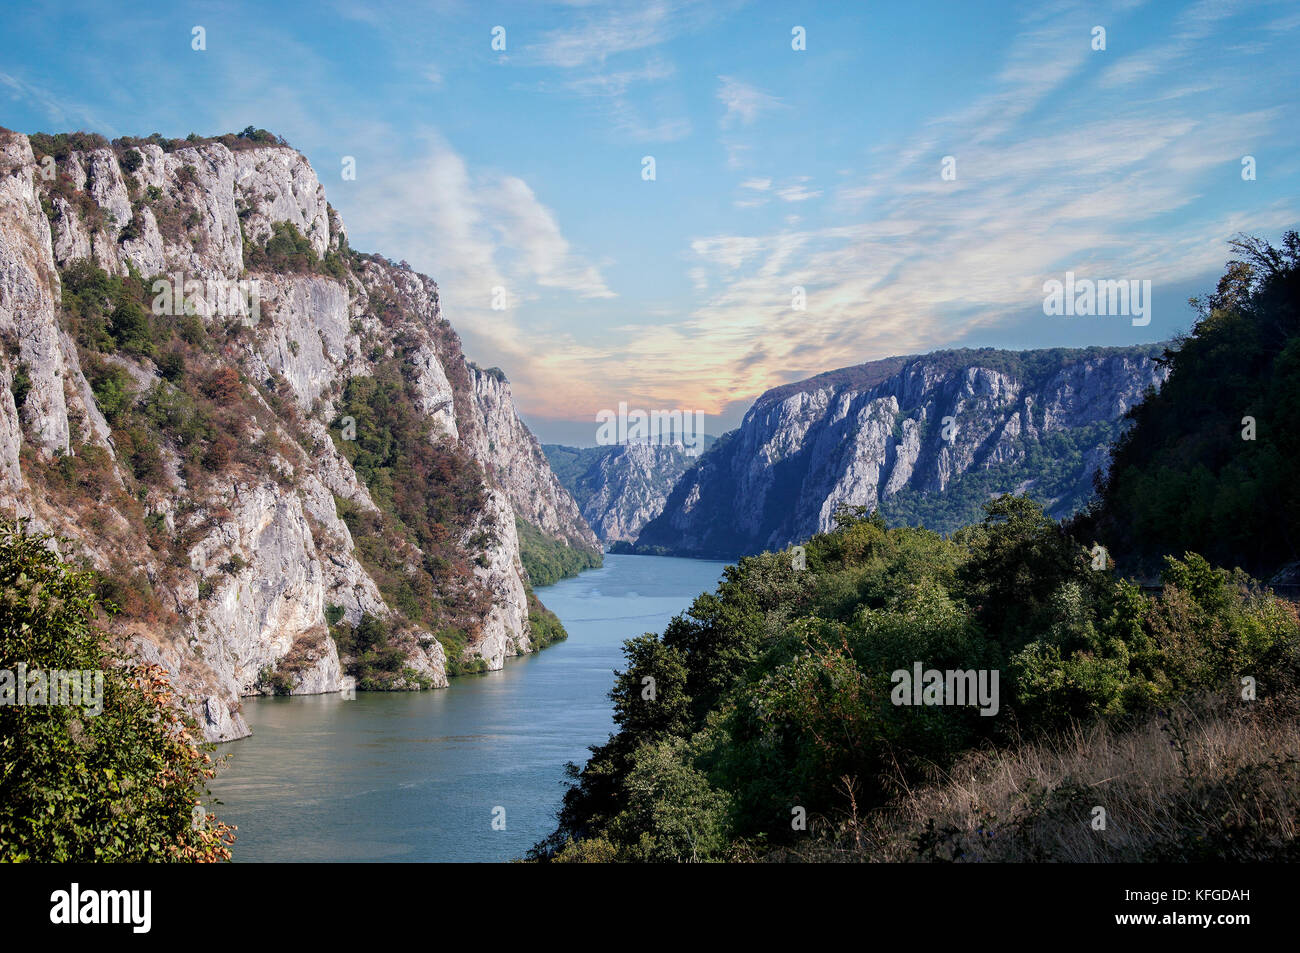 Danube river near the Serbian city of Donji Milanovac in the Iron Gates also known as Djerdap which are the Danube gorges a natural symbol of the bord Stock Photo